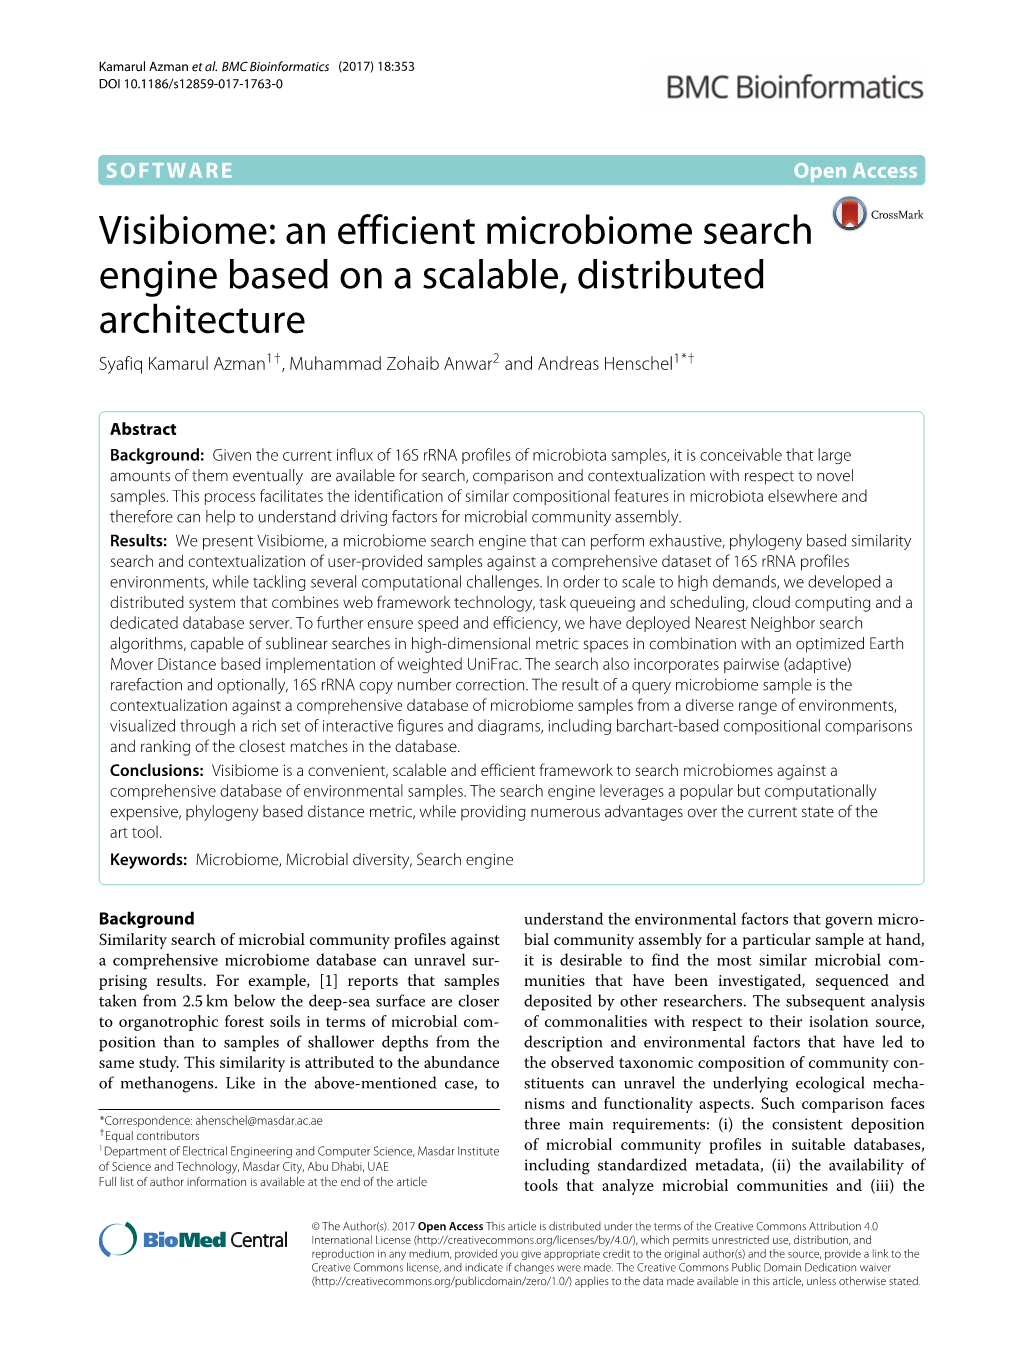 Visibiome: an Efficient Microbiome Search Engine Based on a Scalable, Distributed Architecture Syafiq Kamarul Azman1†, Muhammad Zohaib Anwar2 and Andreas Henschel1*†